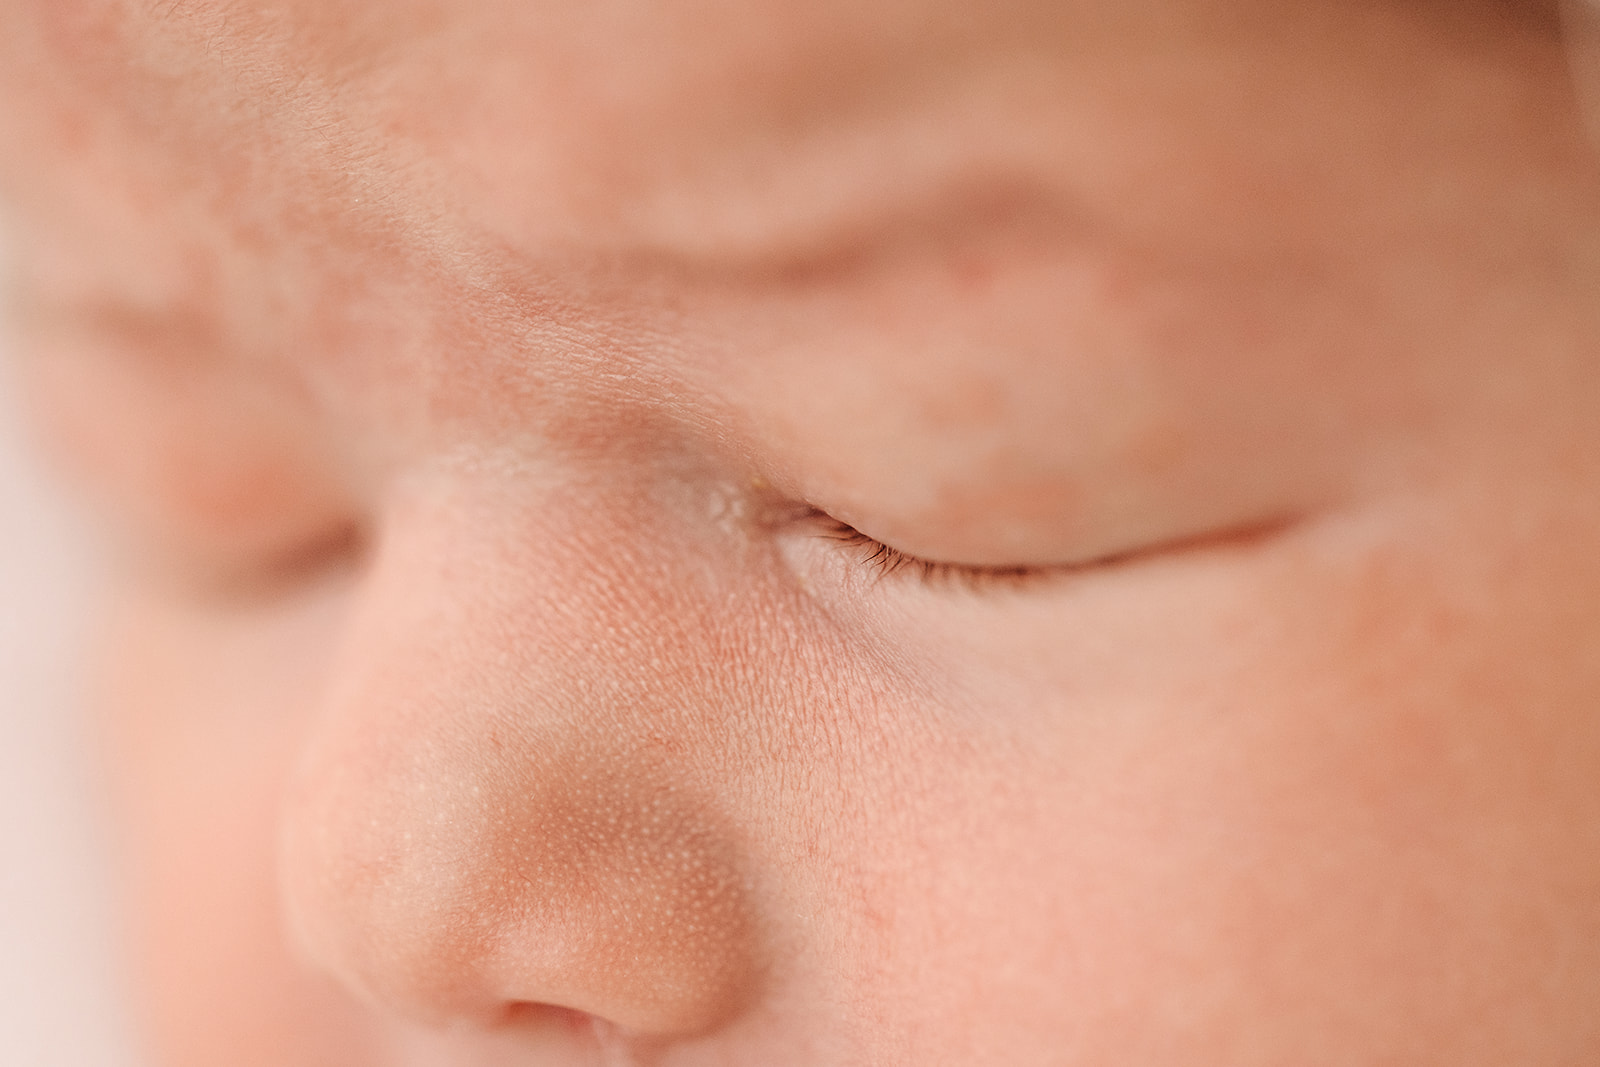 Details of a sleeping newborn baby's face thanks to IVF St Louis